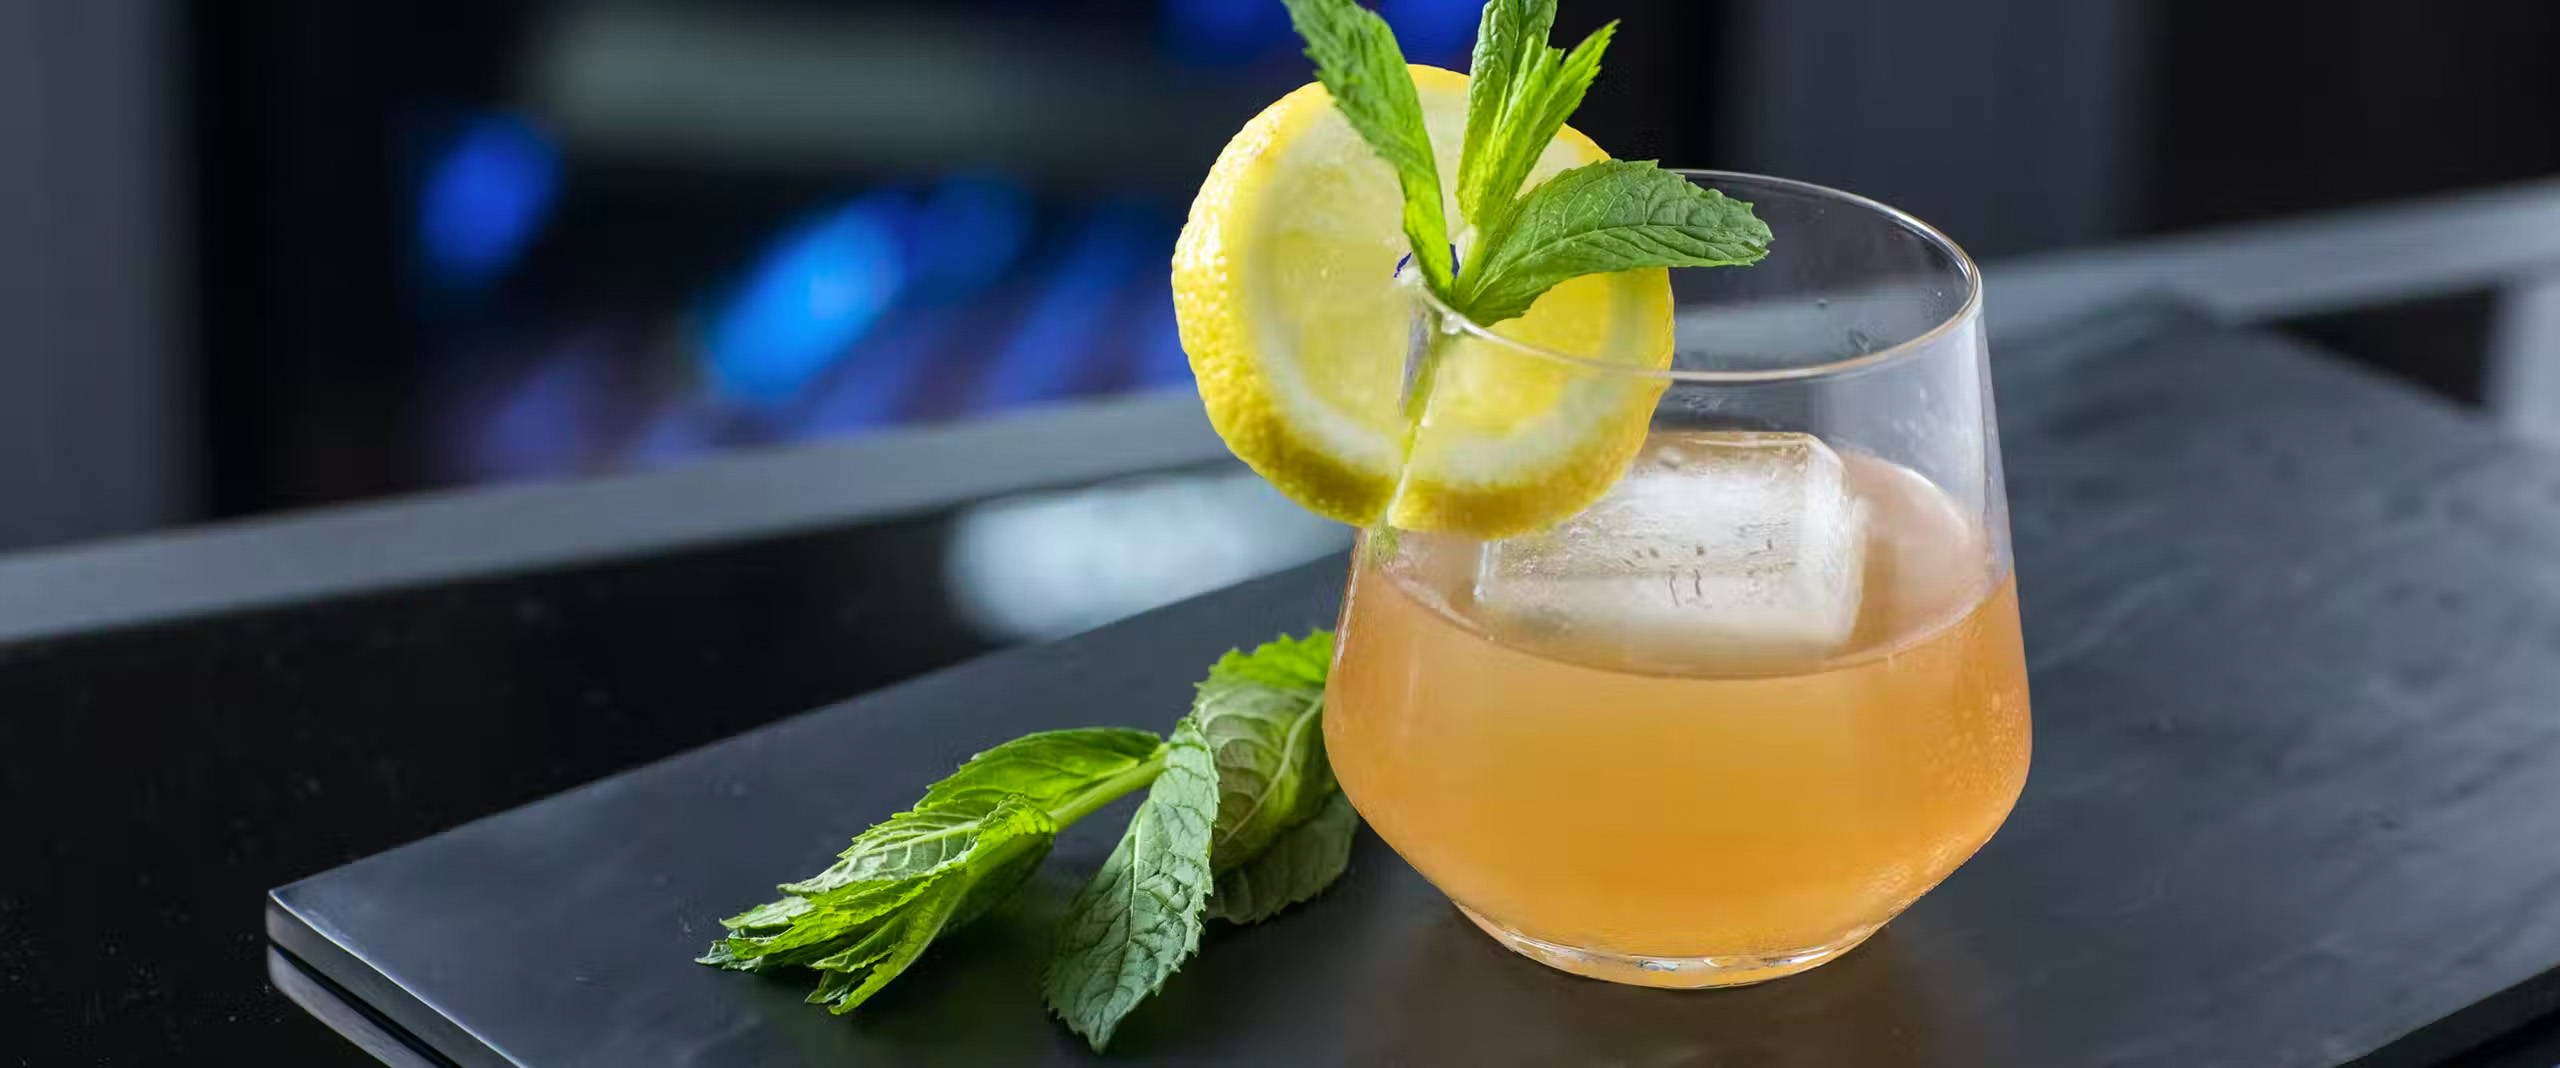 Close up of citrus bourbon cocktail in a glass with lemon and sprig of mint as garnishes